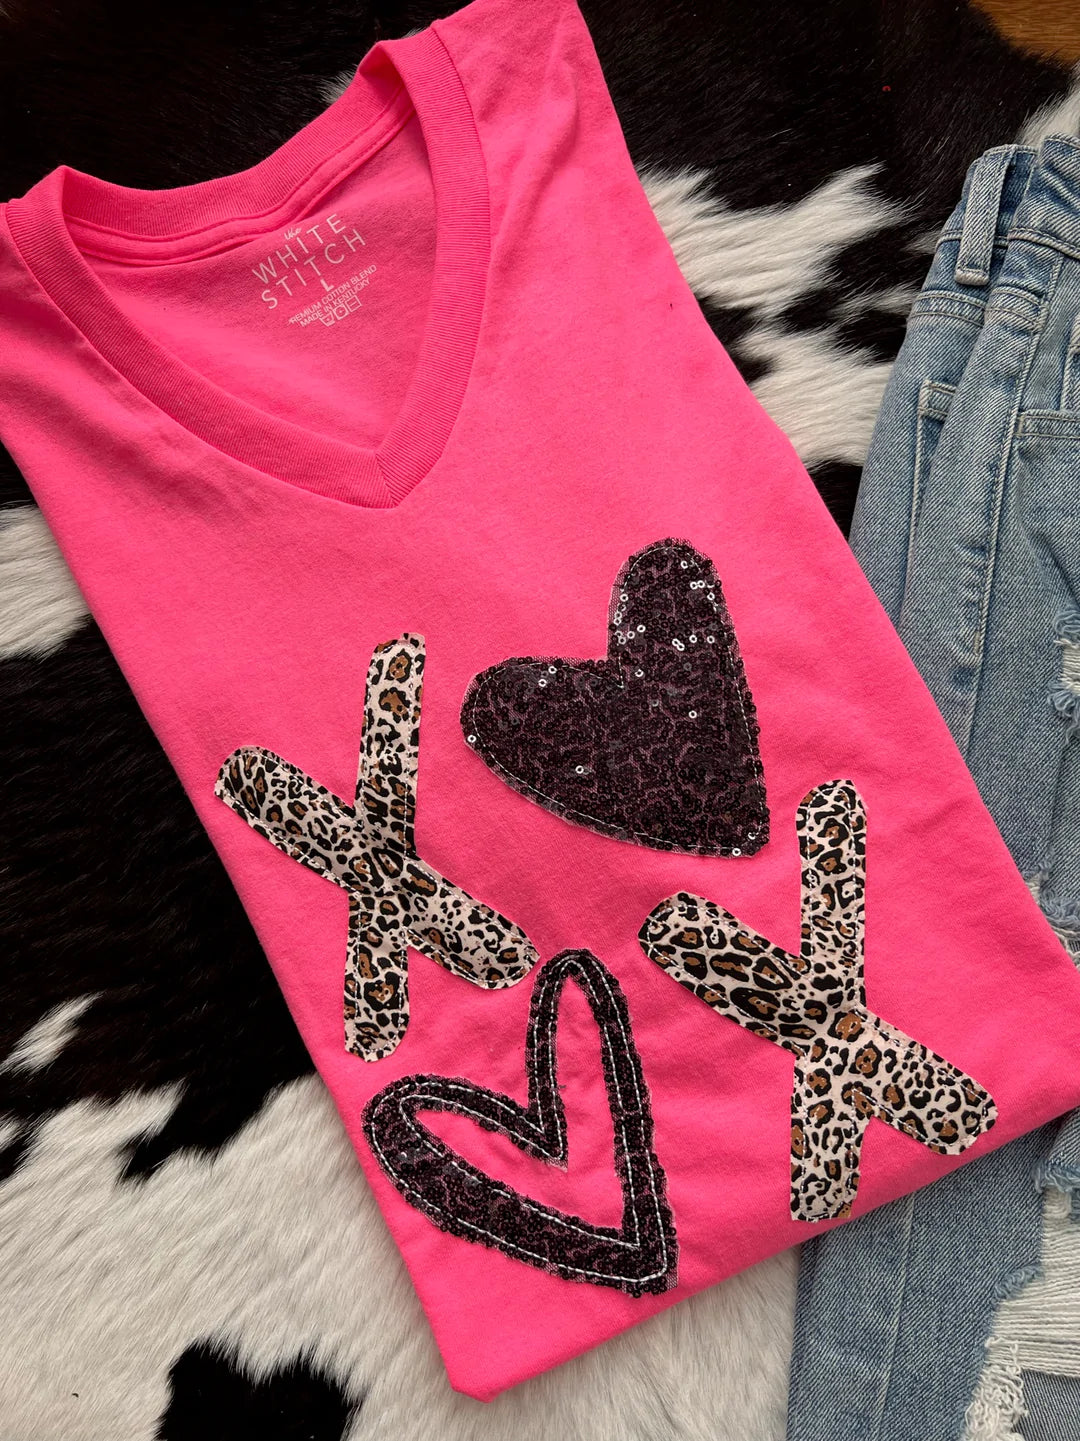 Stacked XO Black Hearts on Hot Pink Tee